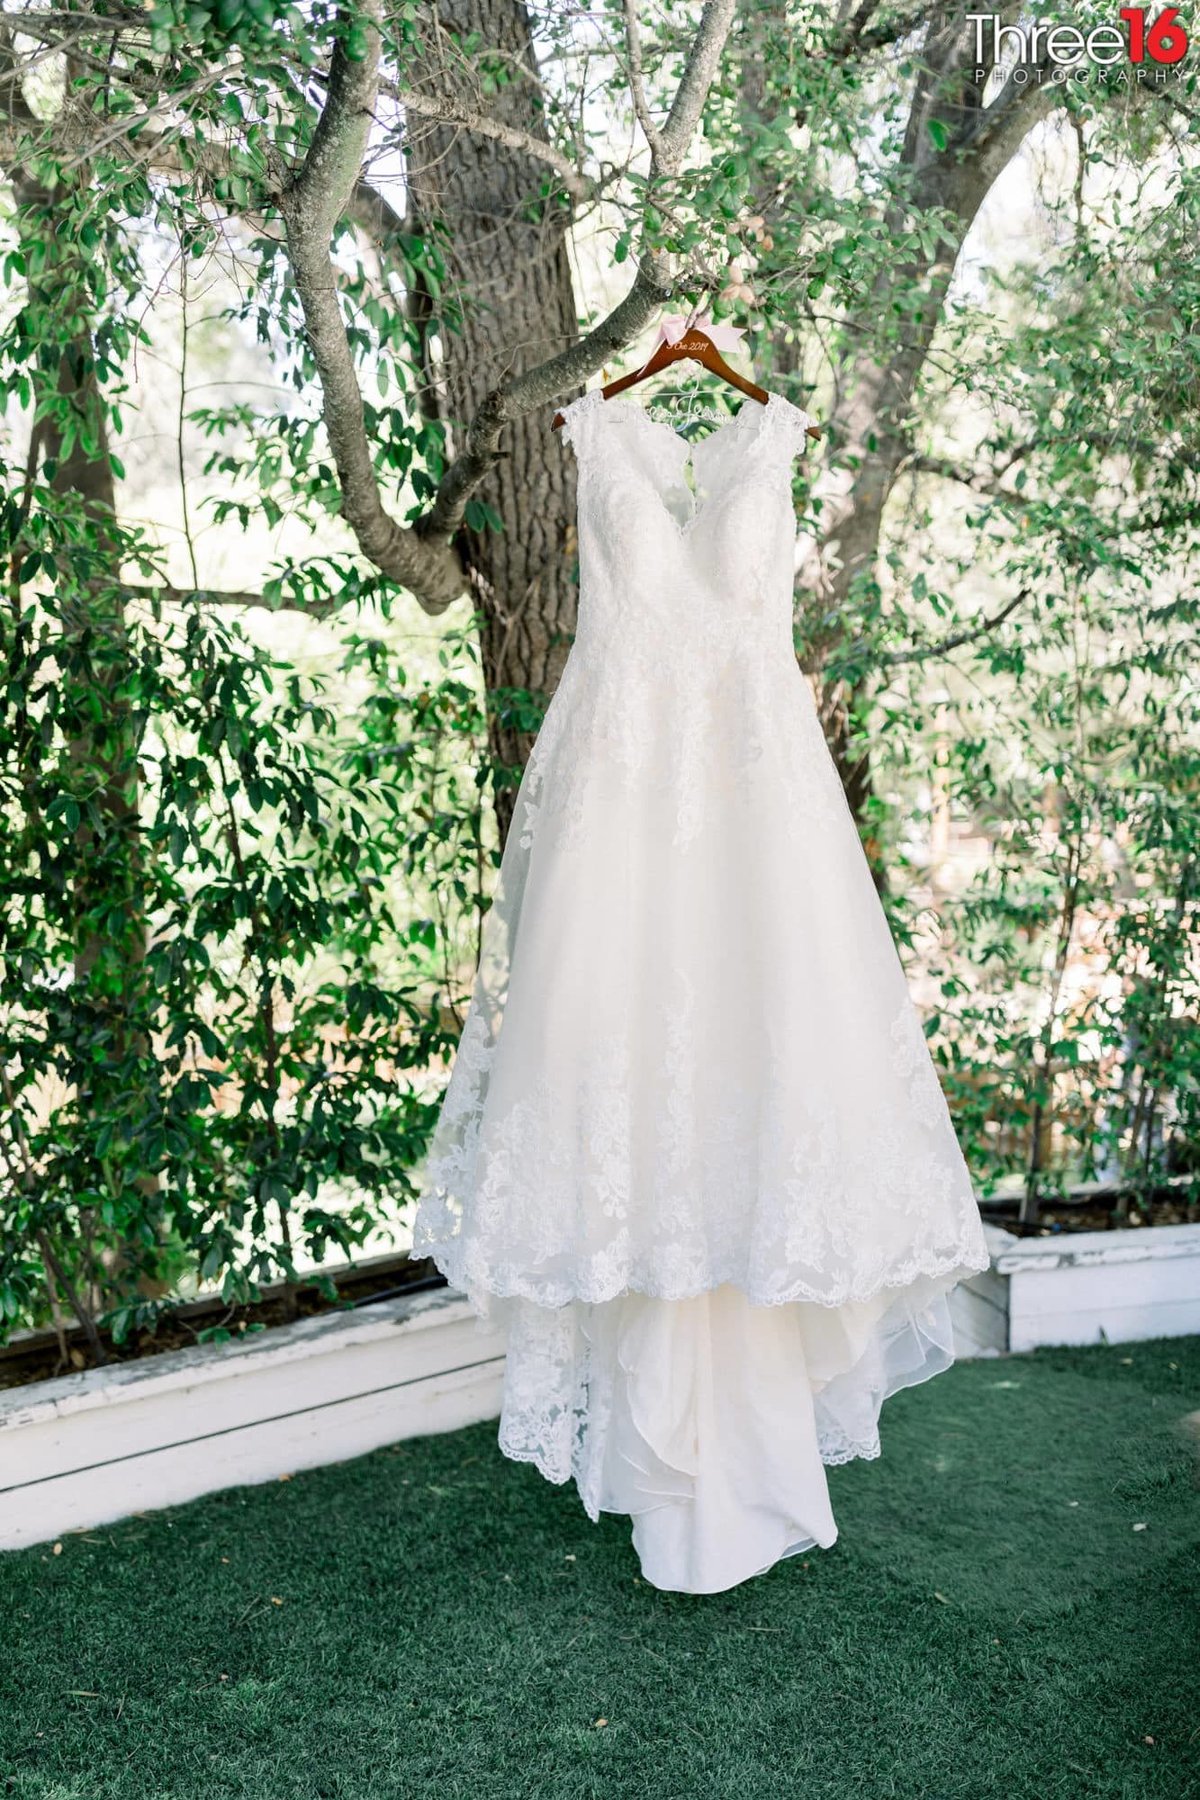 Wedding gown hanging from a tree at Calamigos Ranch in Malibu, CA